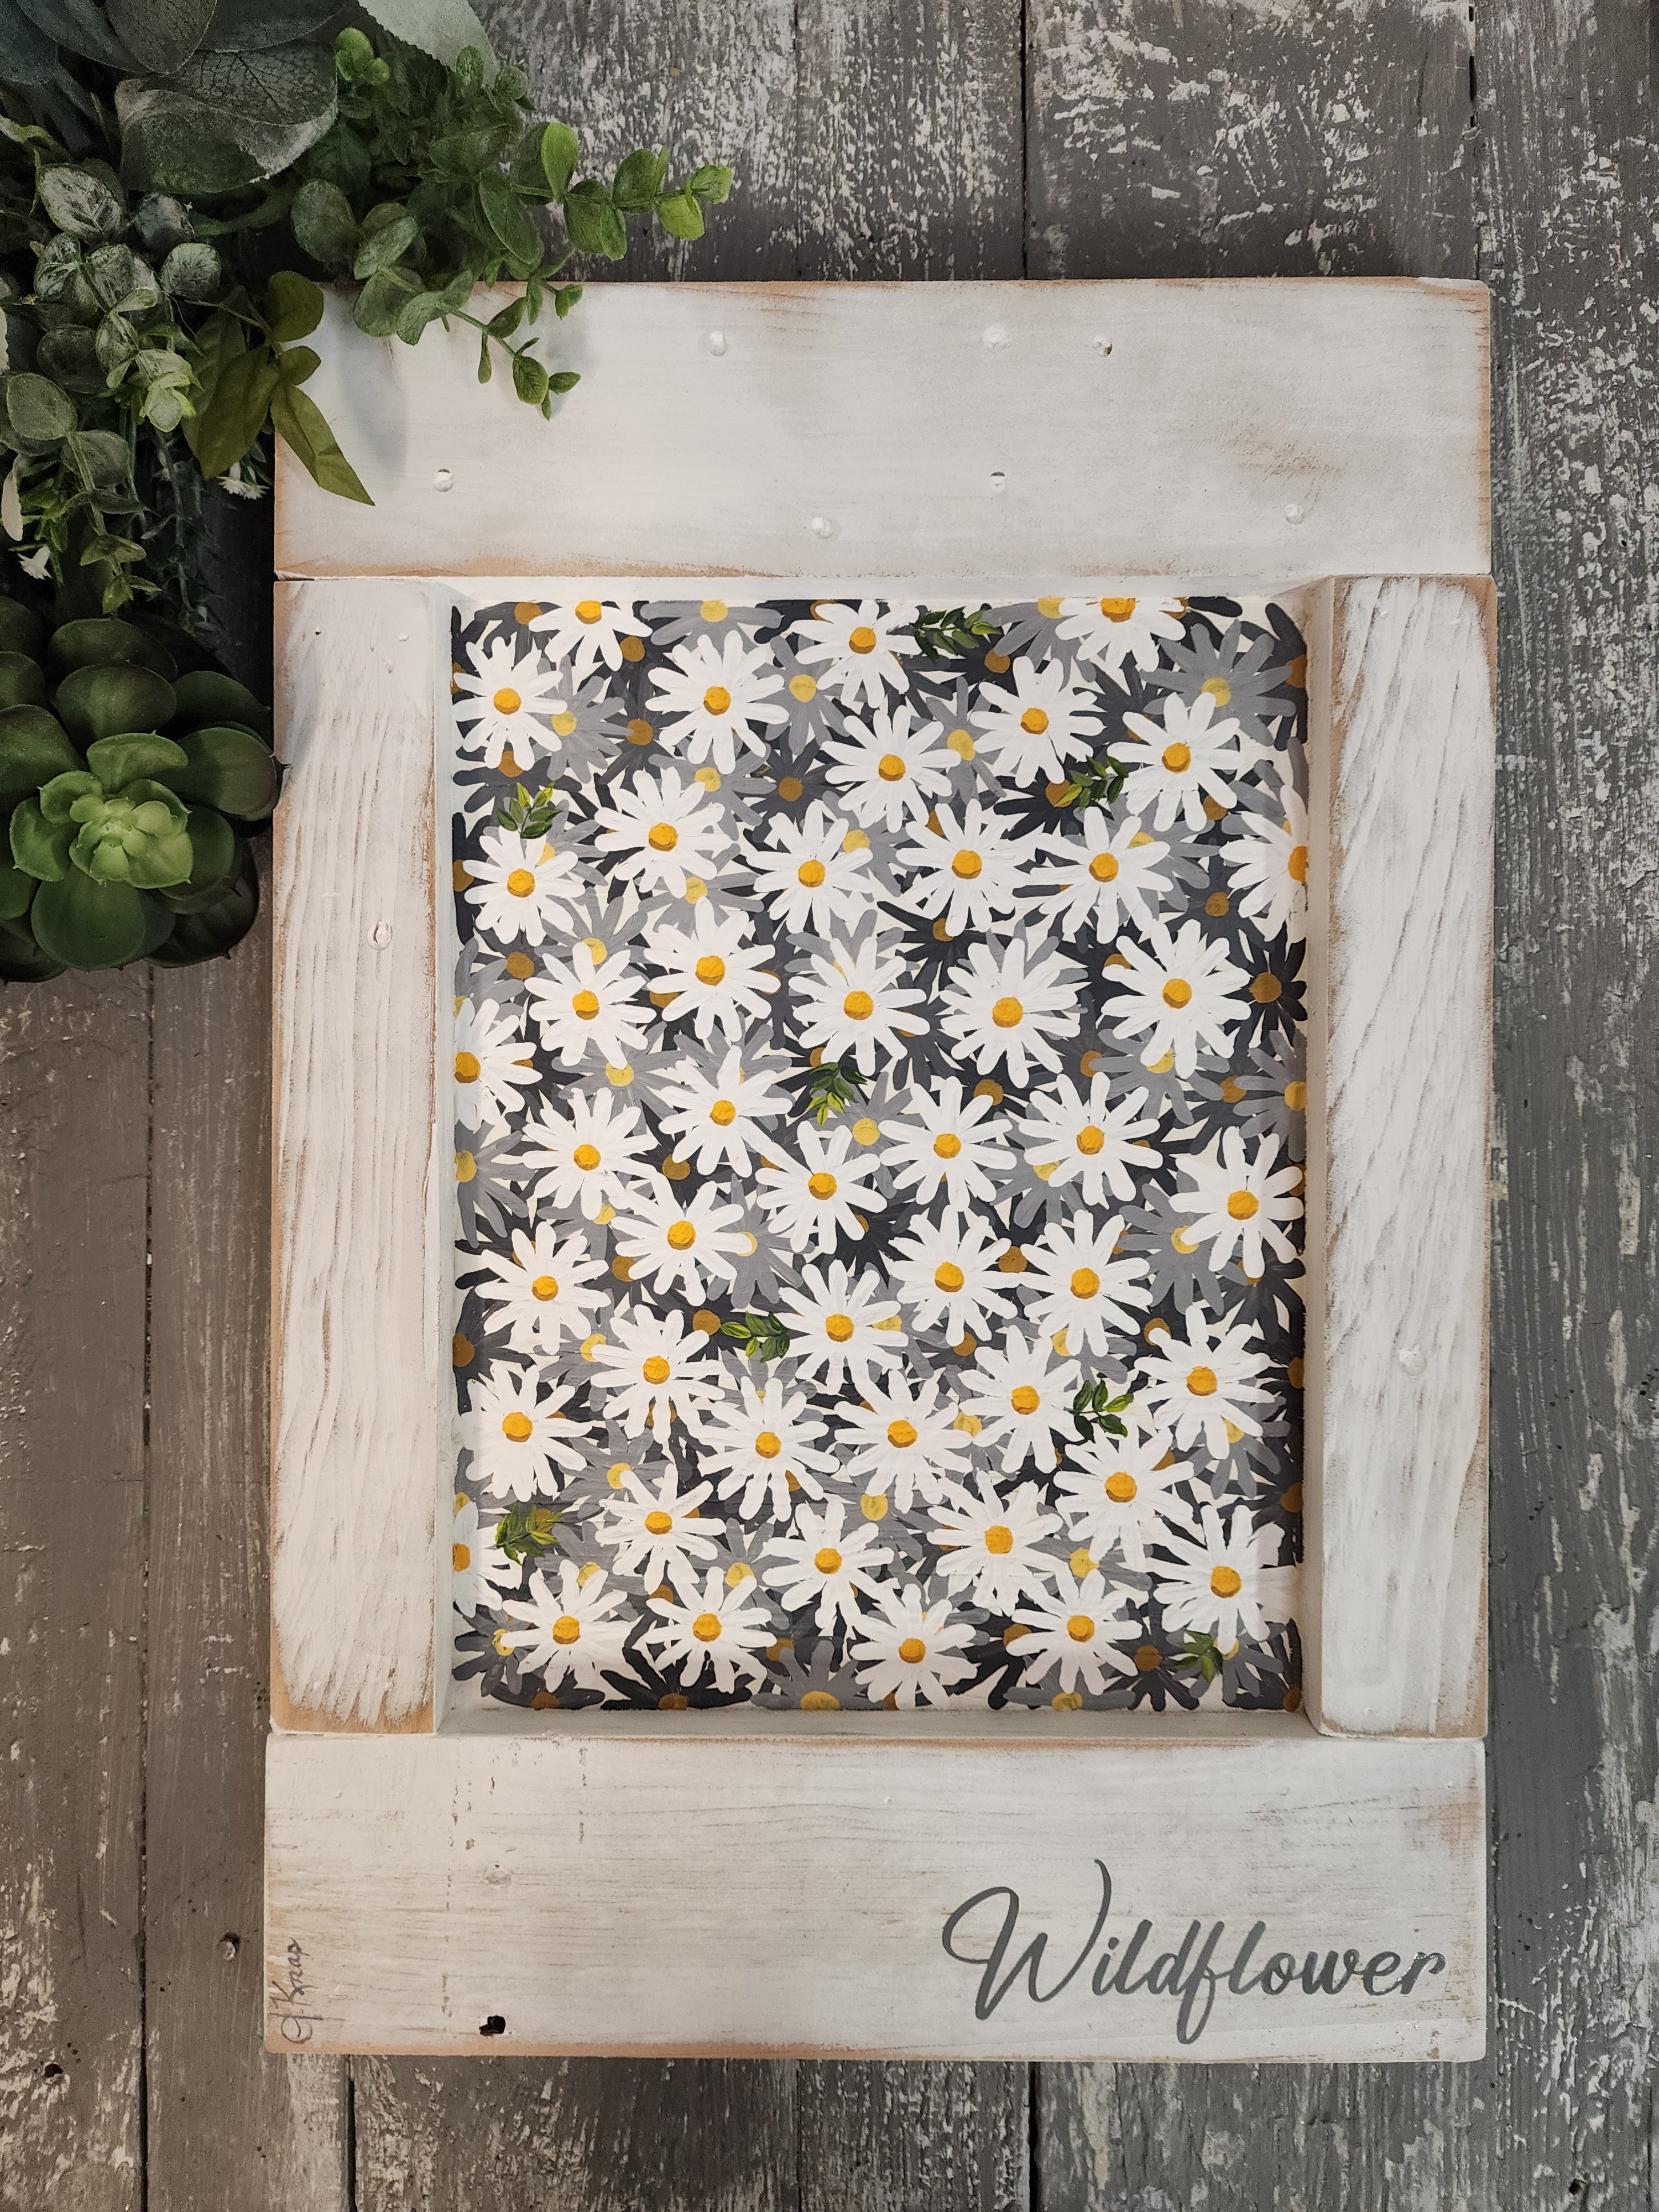 Acrylic floral gray daisy painting on pallet wood, Wildflower, daisy design on farmhouse white background, summer cottage and deck decor artwork